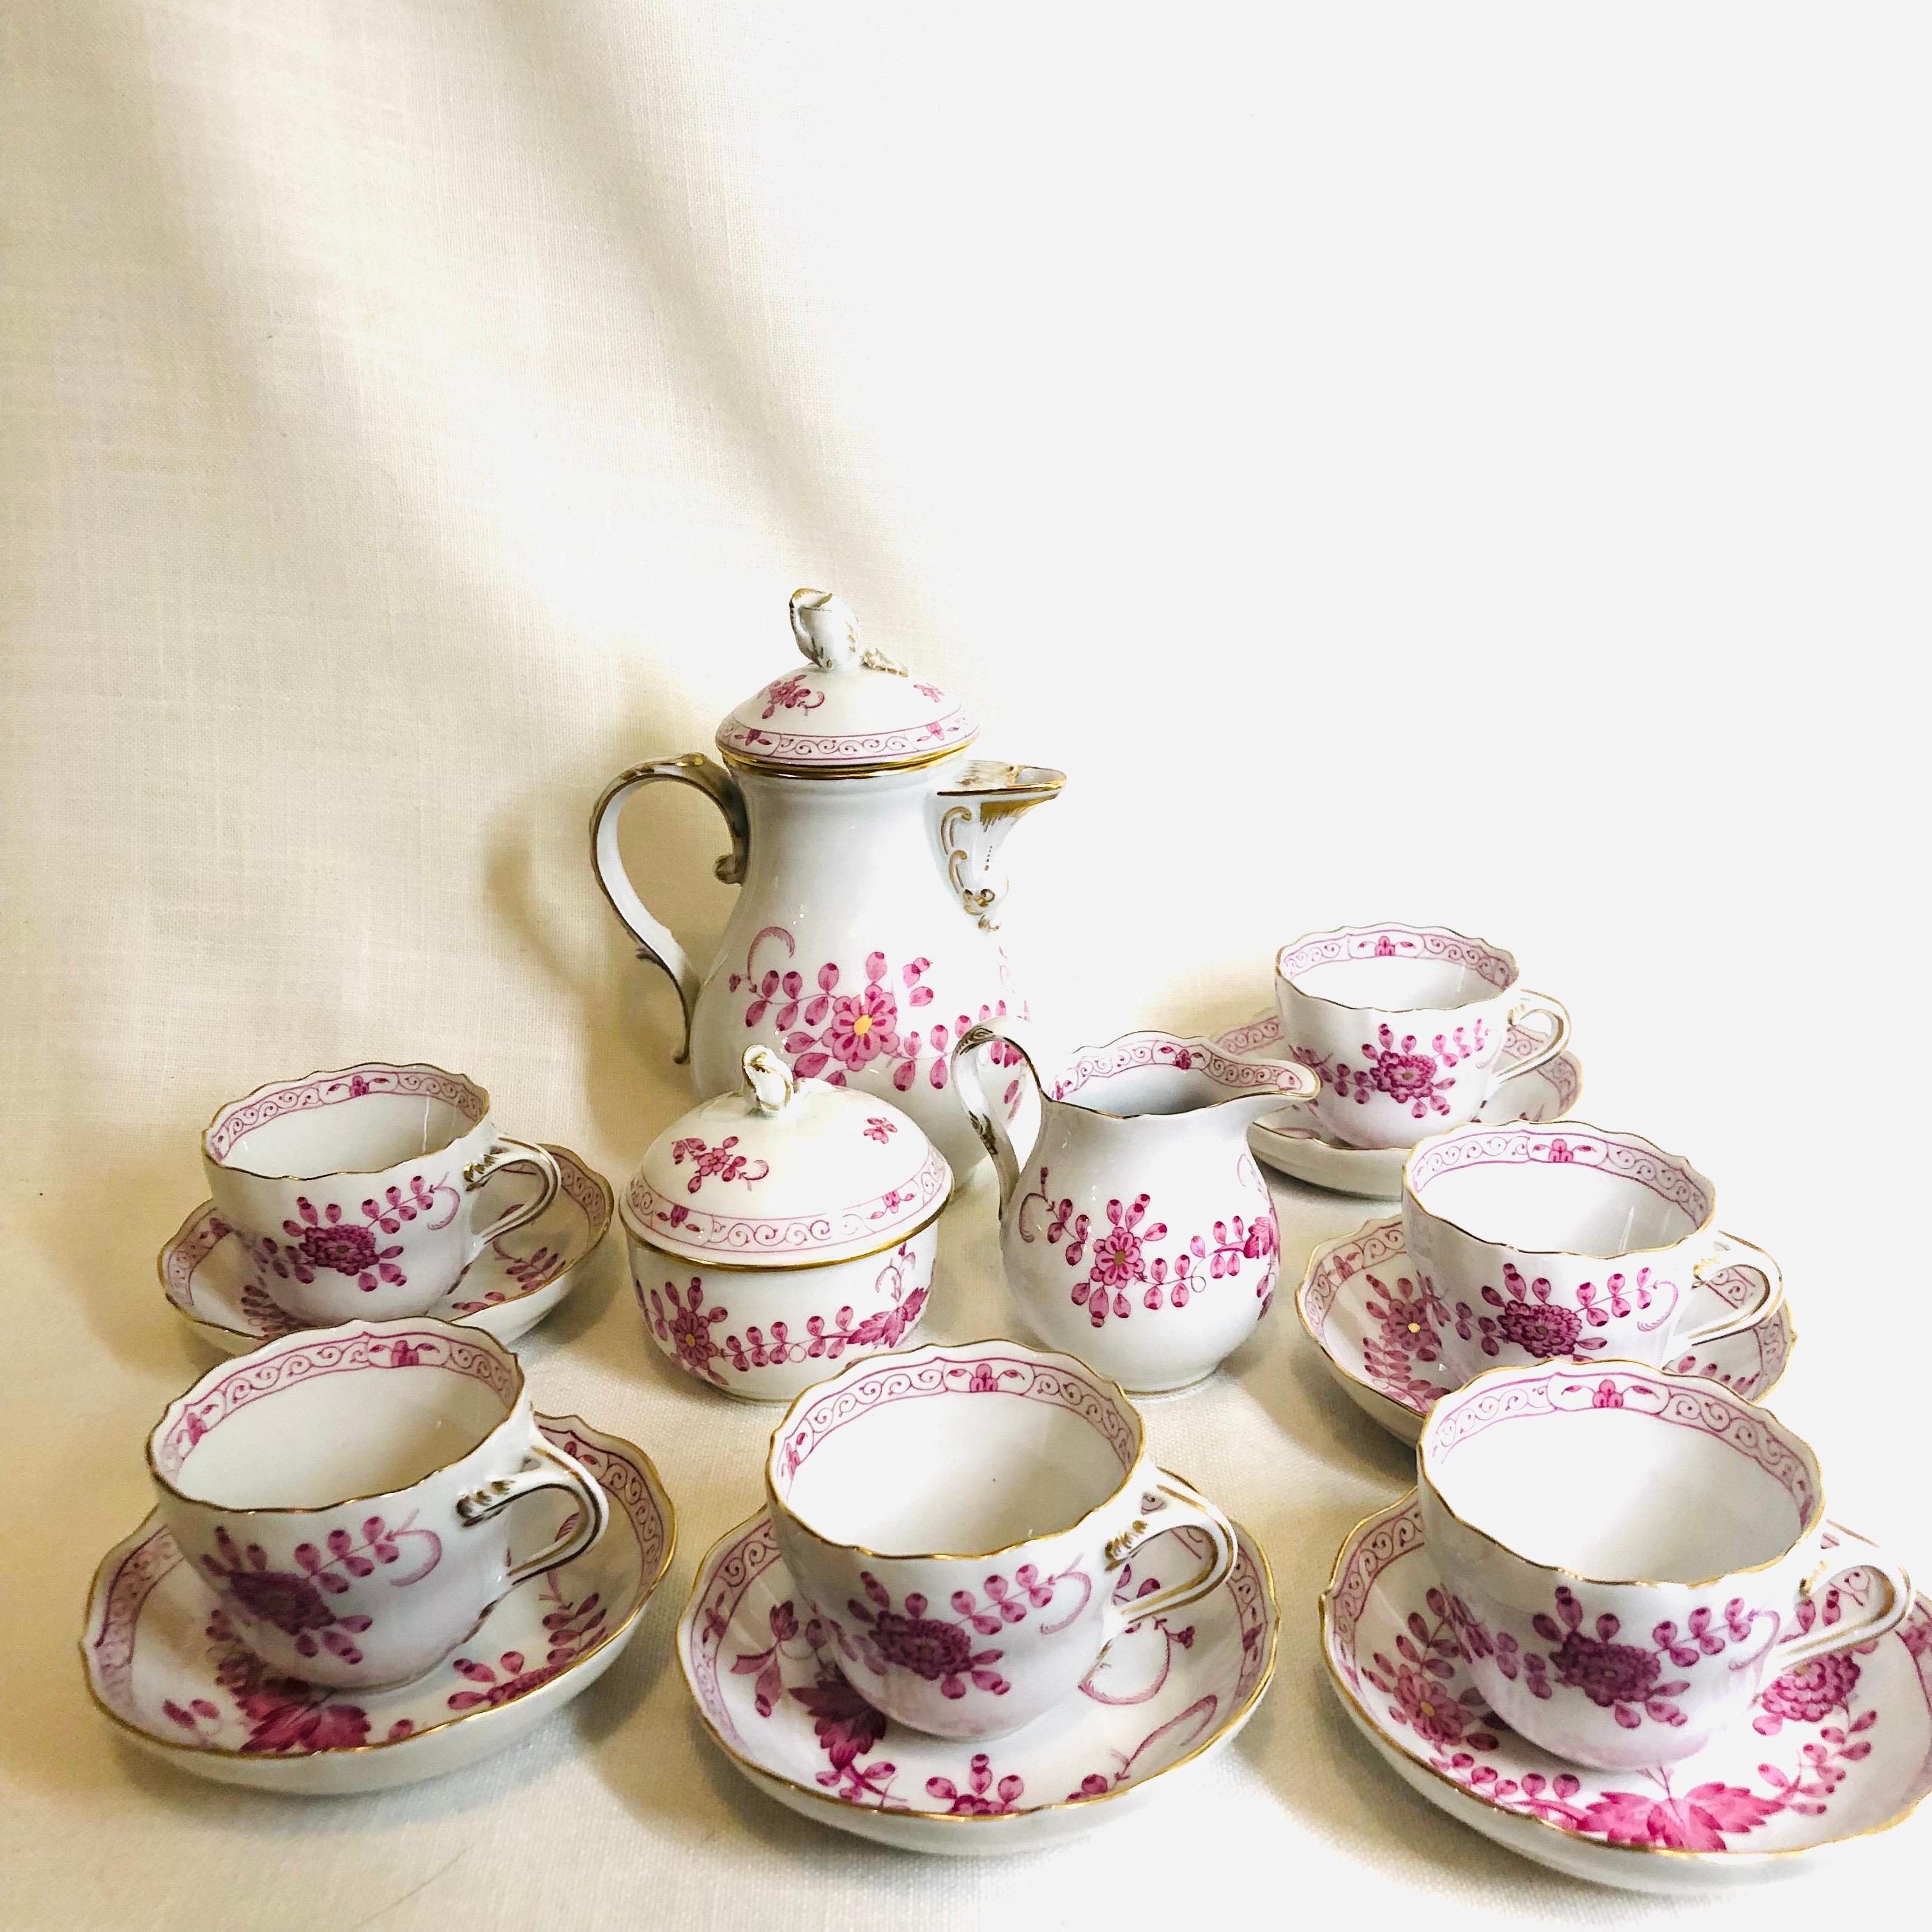 This is a wonderful pink Indian Blumen demitasse set, which includes a demitasse pot, a sugar and creamer and six demitasse cups and saucers. This is a perfect set for expresso or hot chocolate. I love the pink color, the painting and the shape of